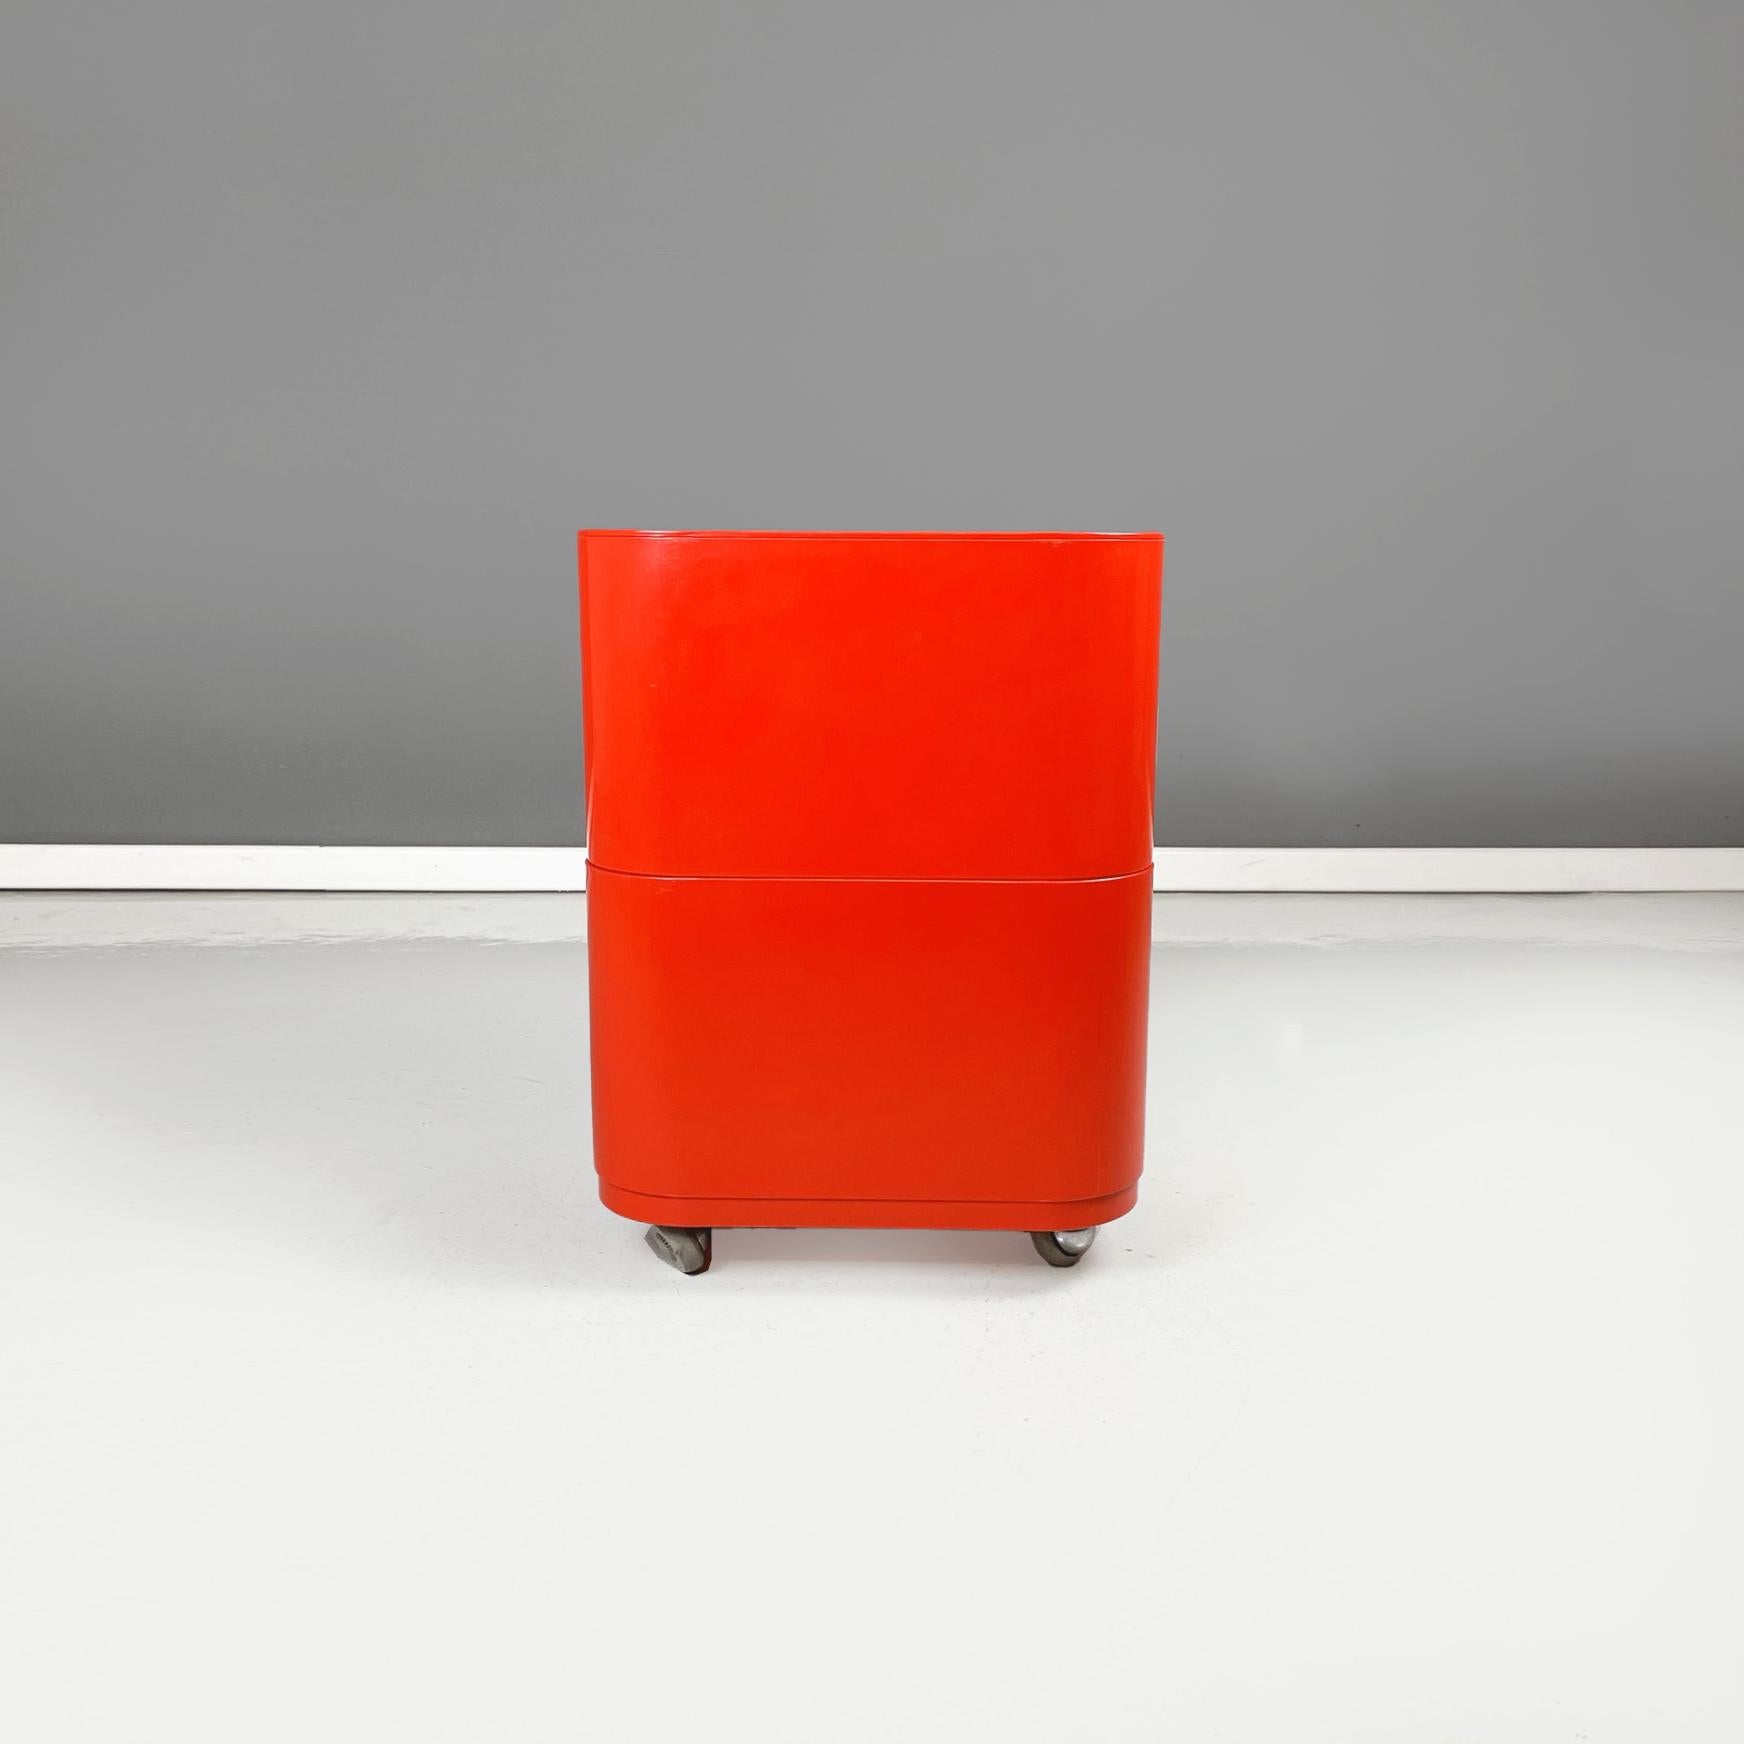 Plastic Italian Space Age Red Modular Chest of Drawers by Castelli for Kartell, 1970s For Sale